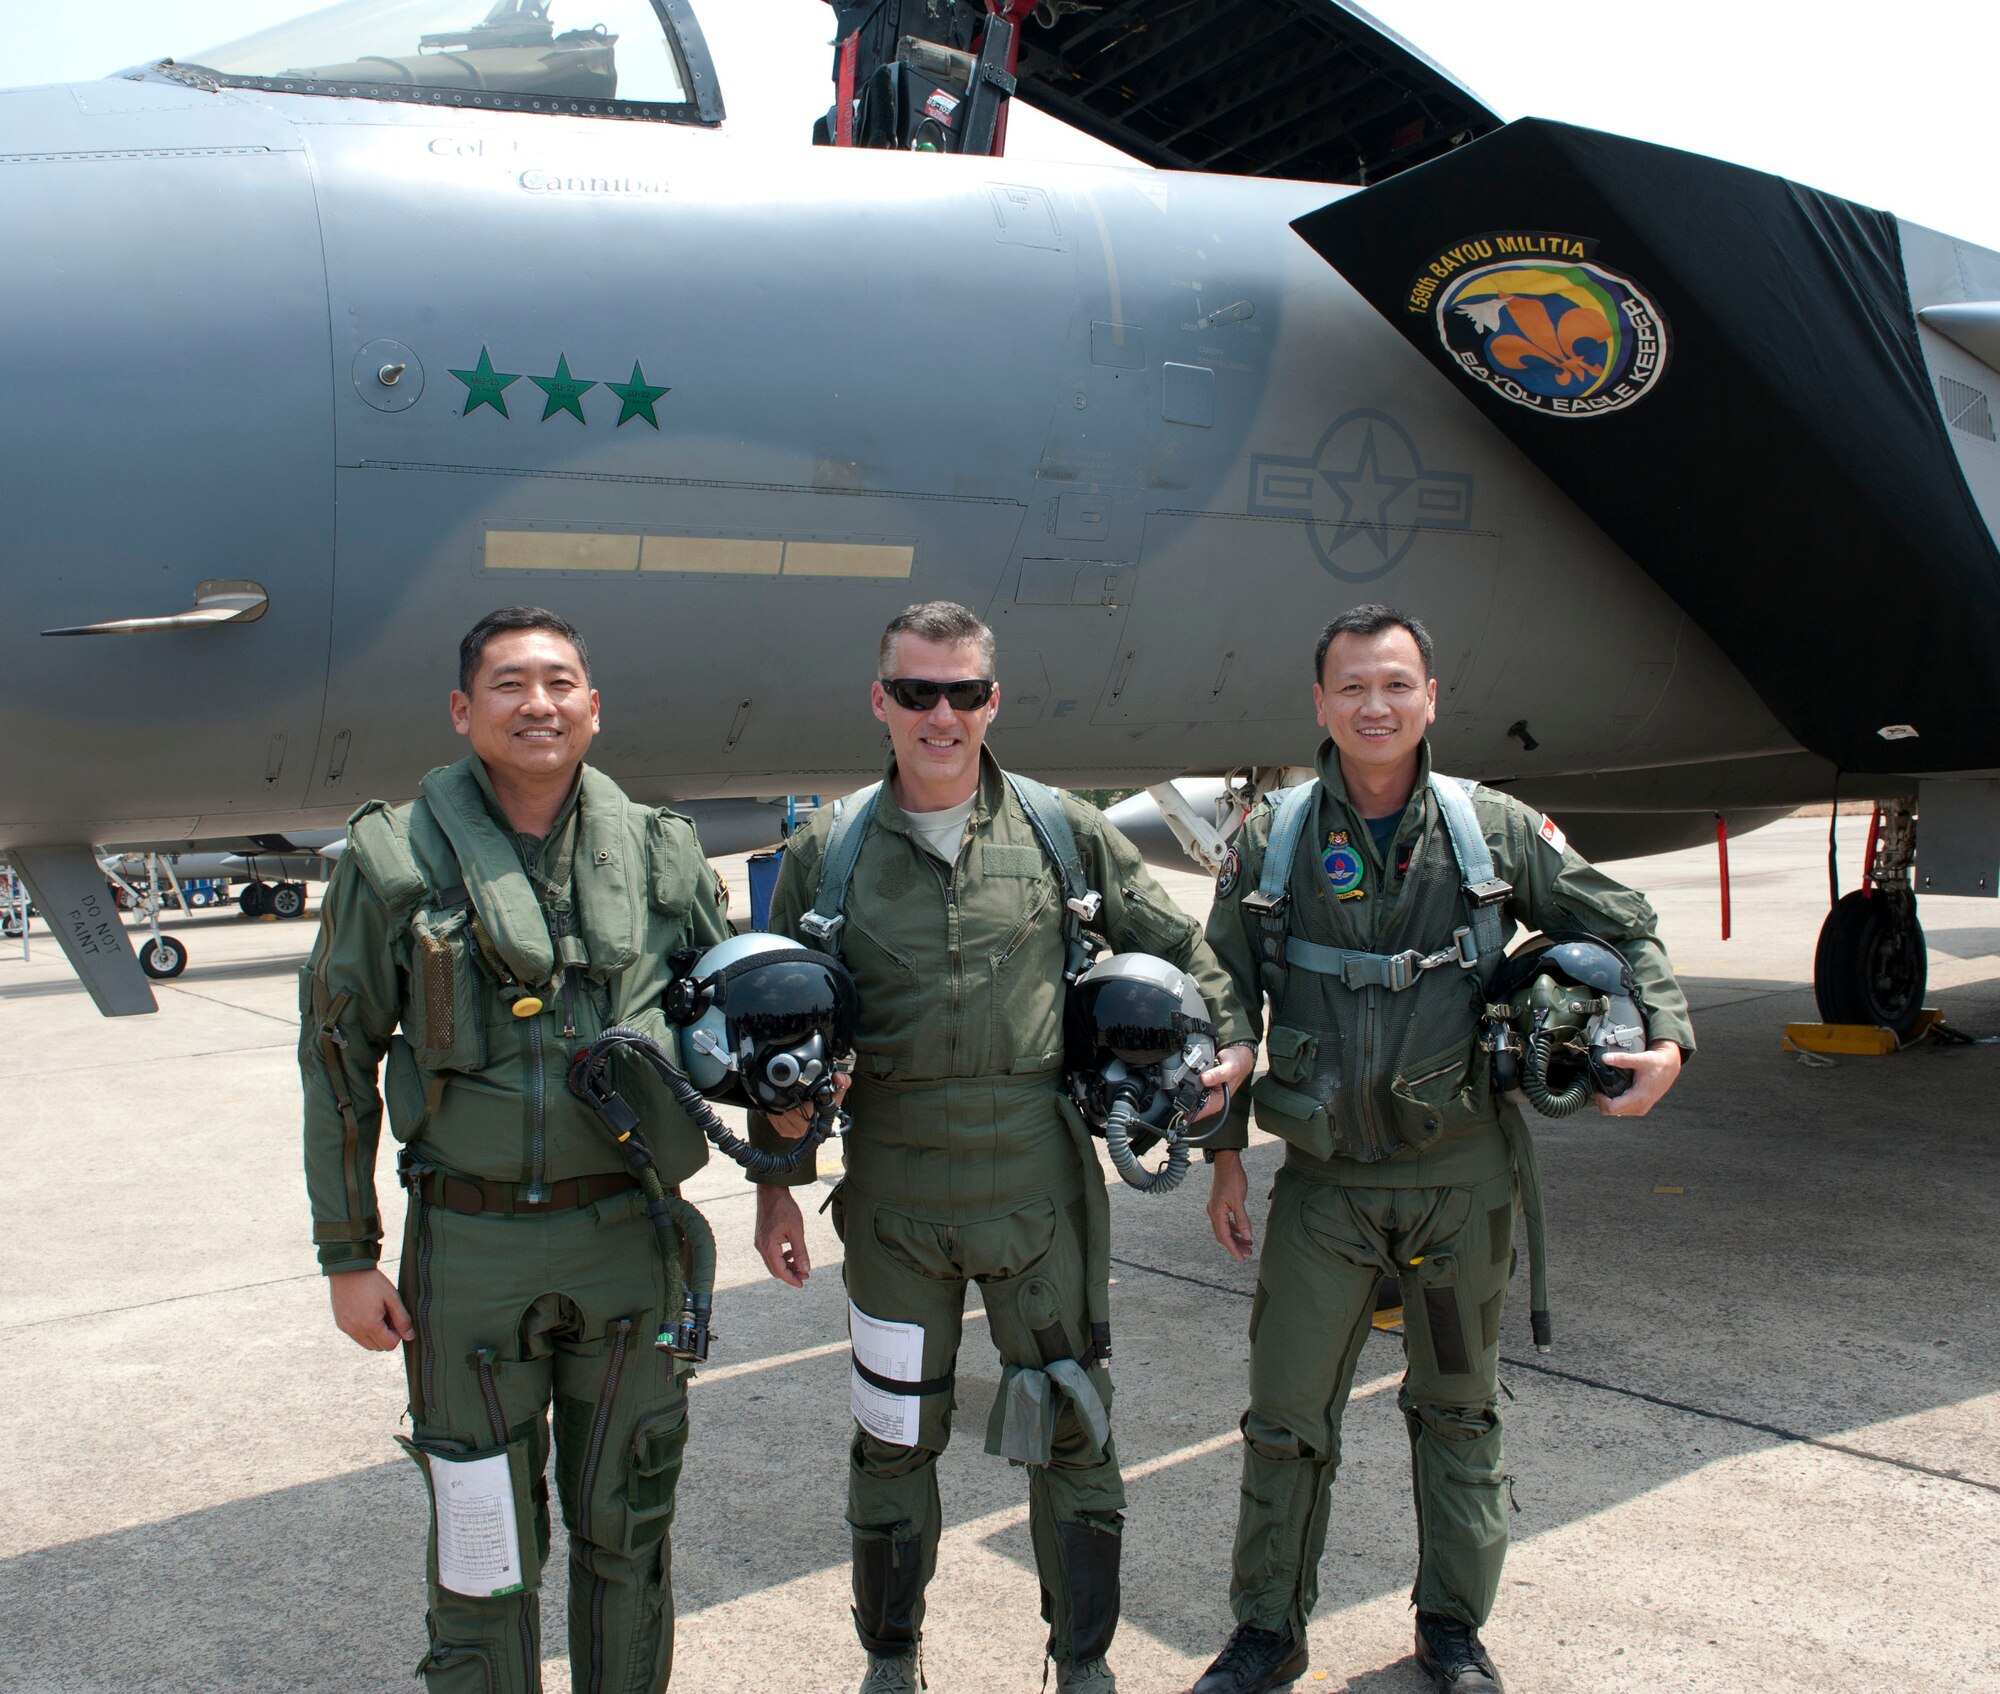 Air Force Col. John Traettino, U.S. Cope Tiger Exercise Director 2014, poses on the flight line at Korat Royal Thai Air Force Base, Thailand with his counterparts from the Republic of Singapore and Royal Thai air forces. Cope Tiger is an annual, multilateral aerial exercise in Thailand to improve combat readiness, interoperability and build relations between Thailand, Singapore and the United States. (U.S. Air Force photo by 2Lt. Michael Harrington/Released)